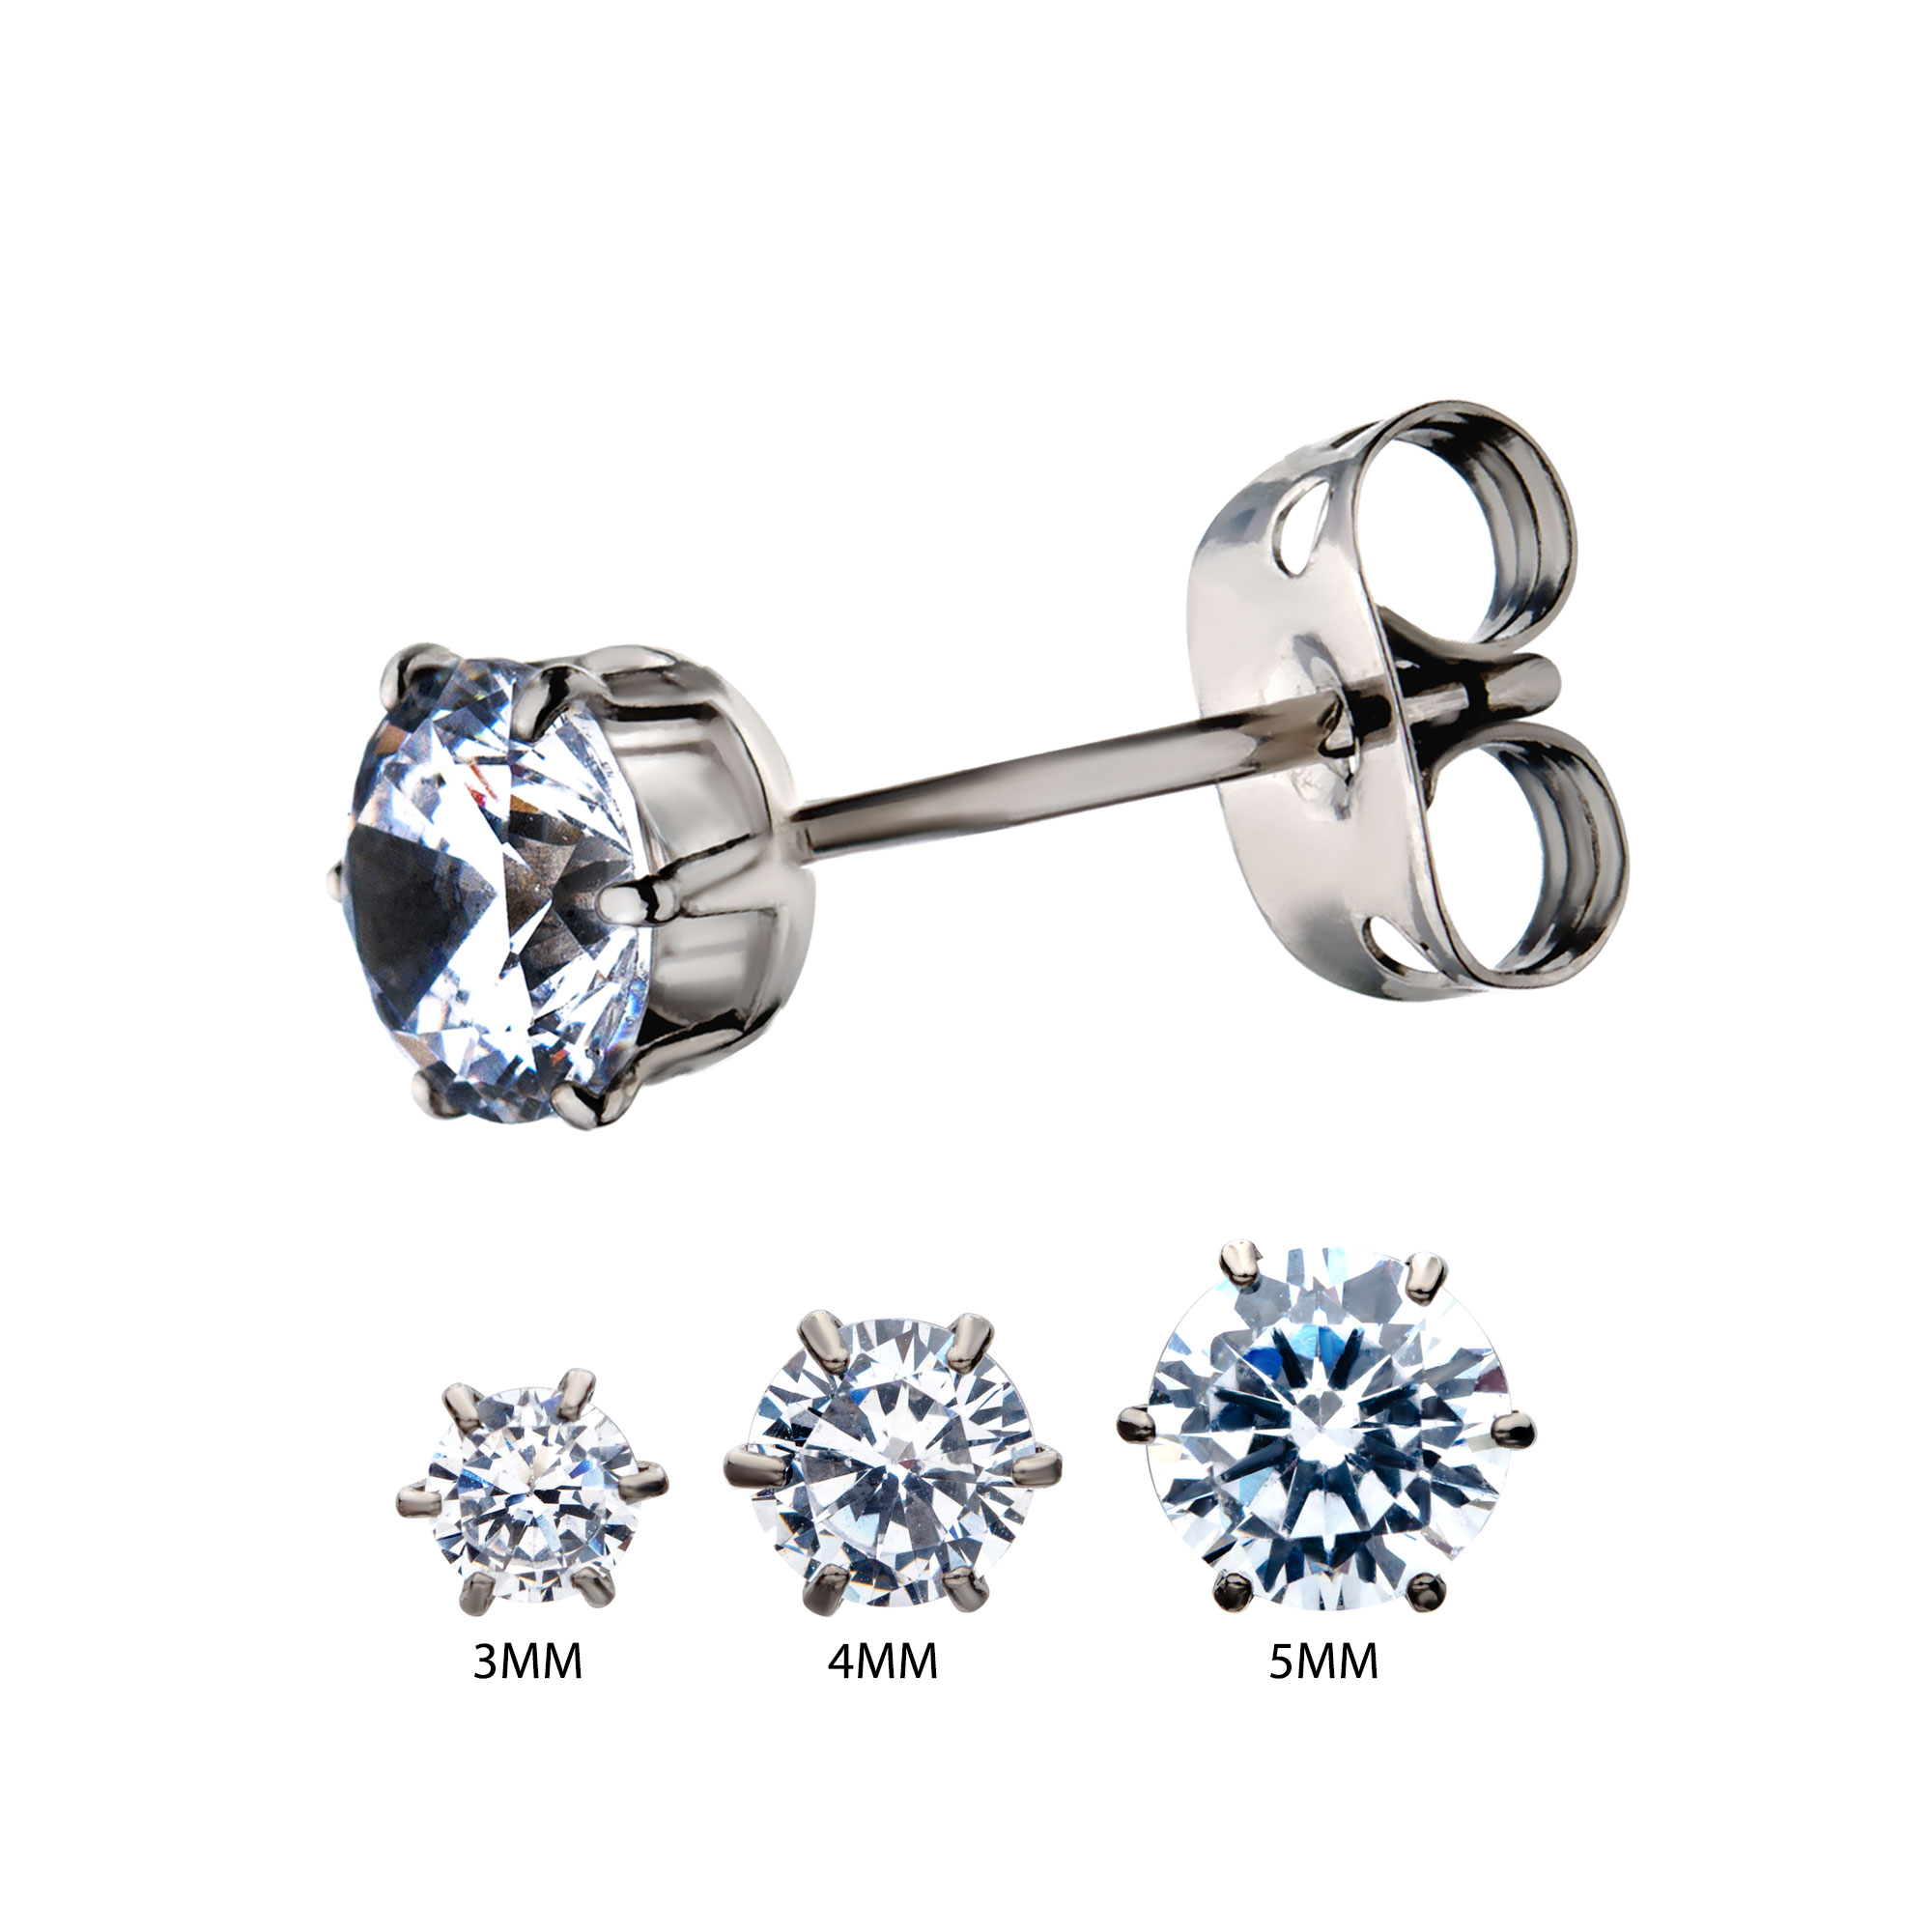 20g Titanium Post and Butterfly Back with Prong Set CZ Stud Earrings Lewis Jewelers, Inc. Ansonia, CT